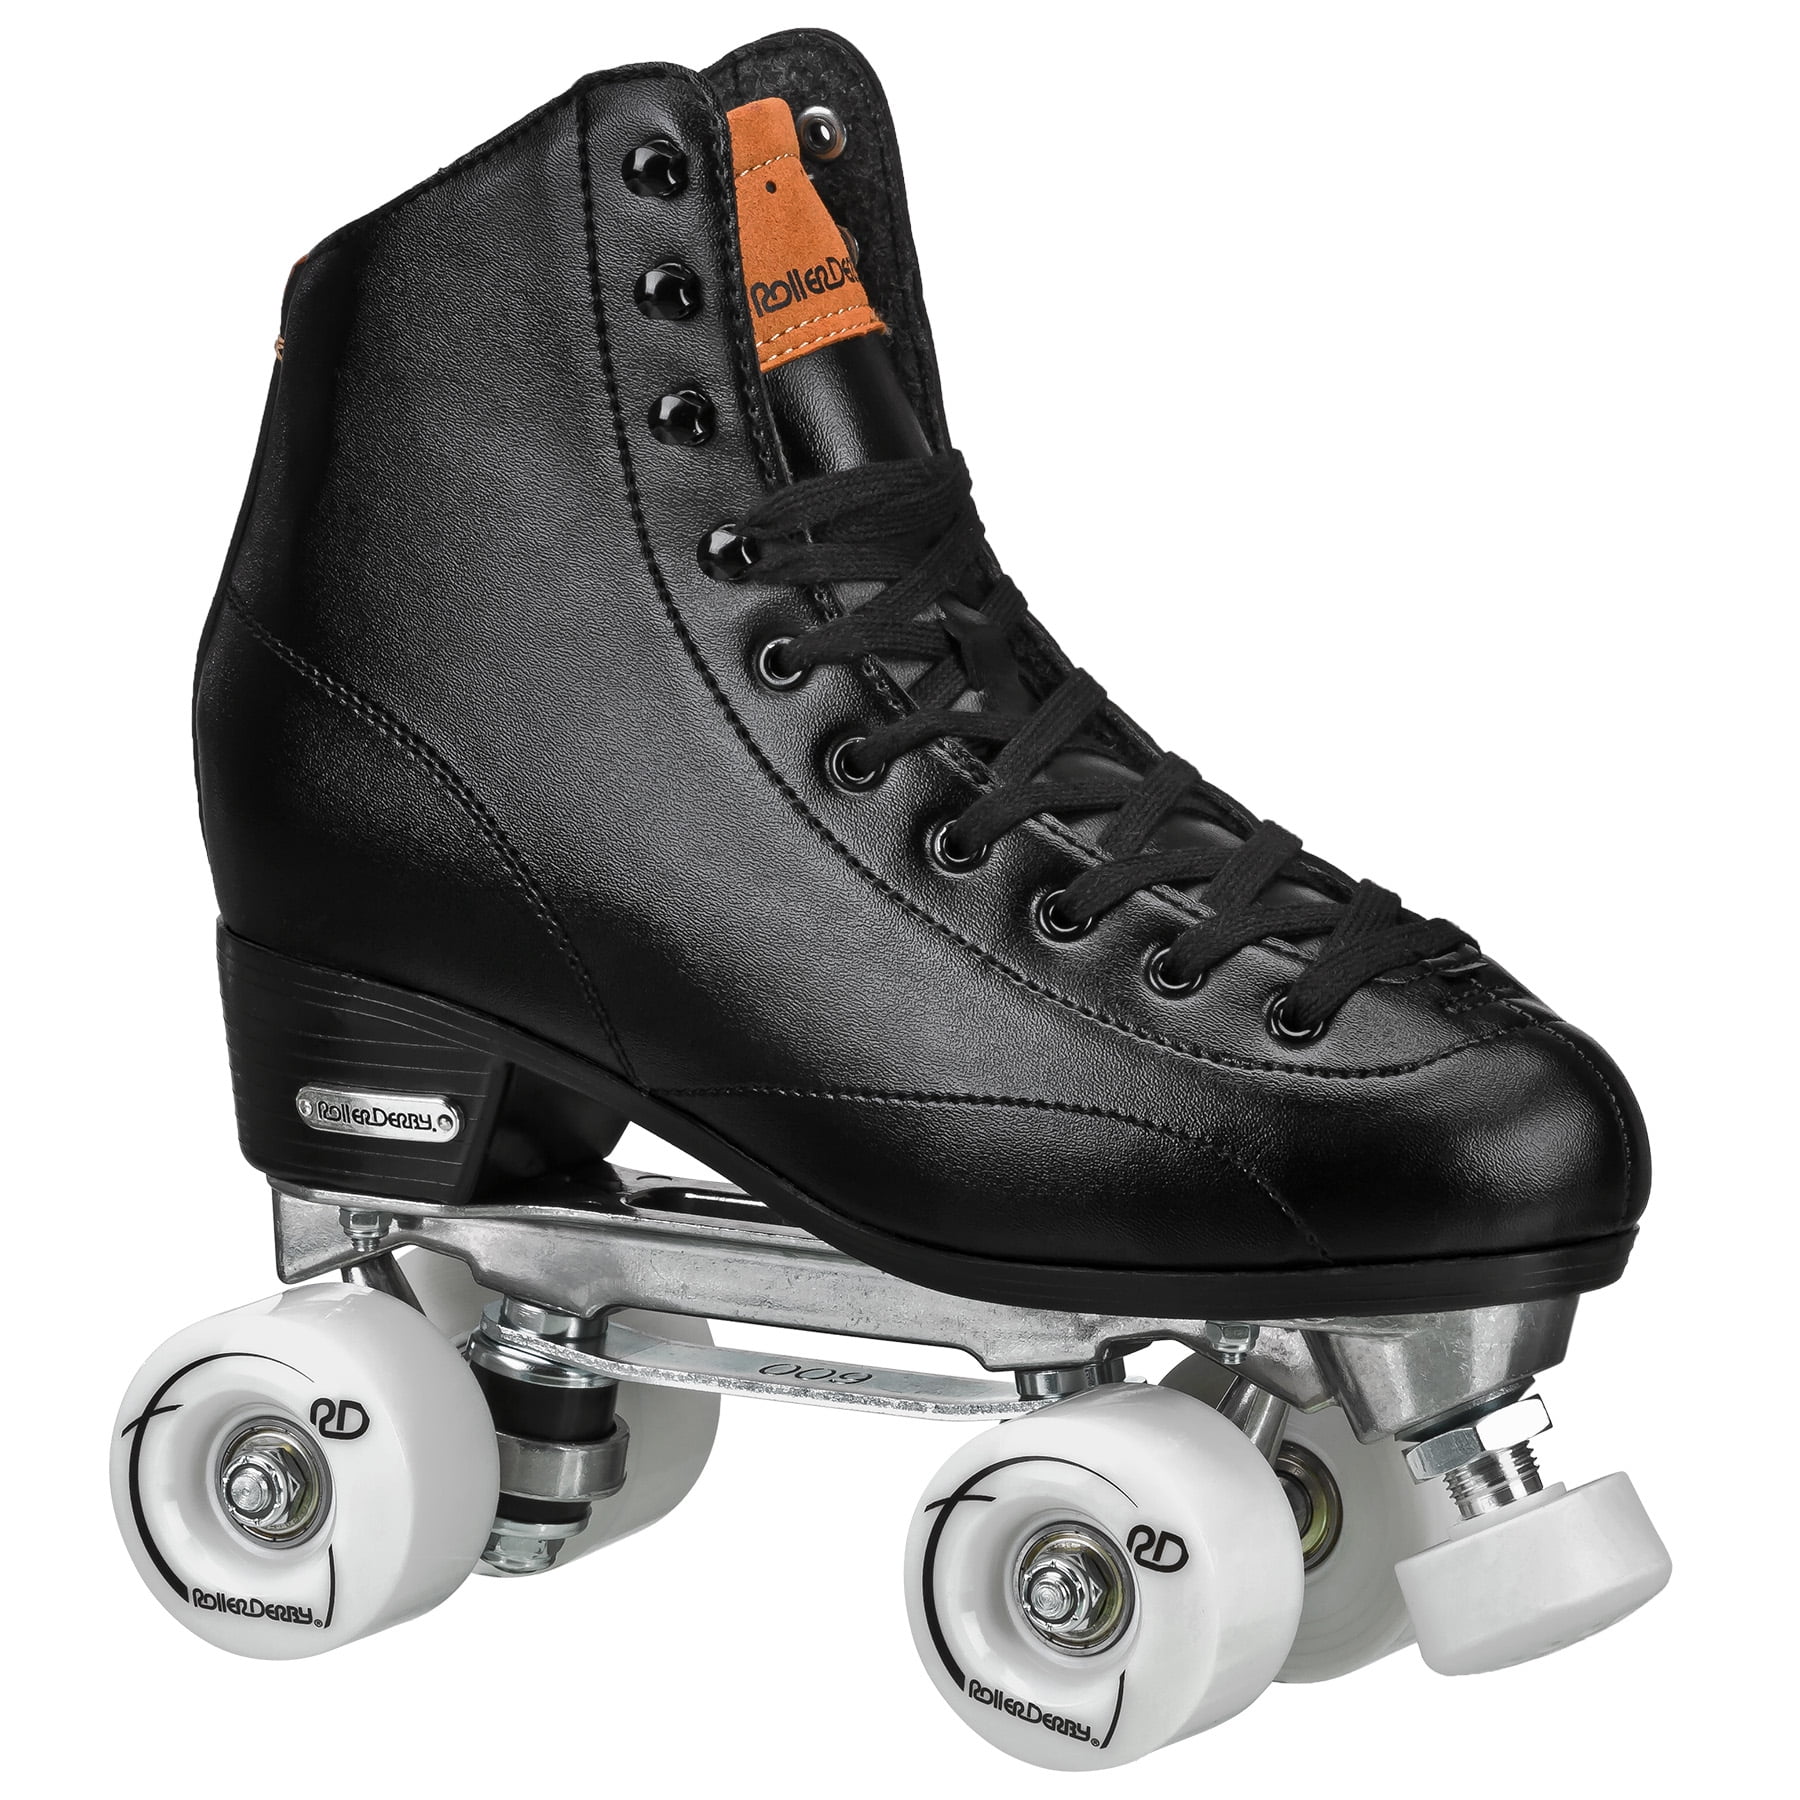 Roller Derby Star 600 Quad Freestyle Women's High Top Skates Size 8 for sale online 